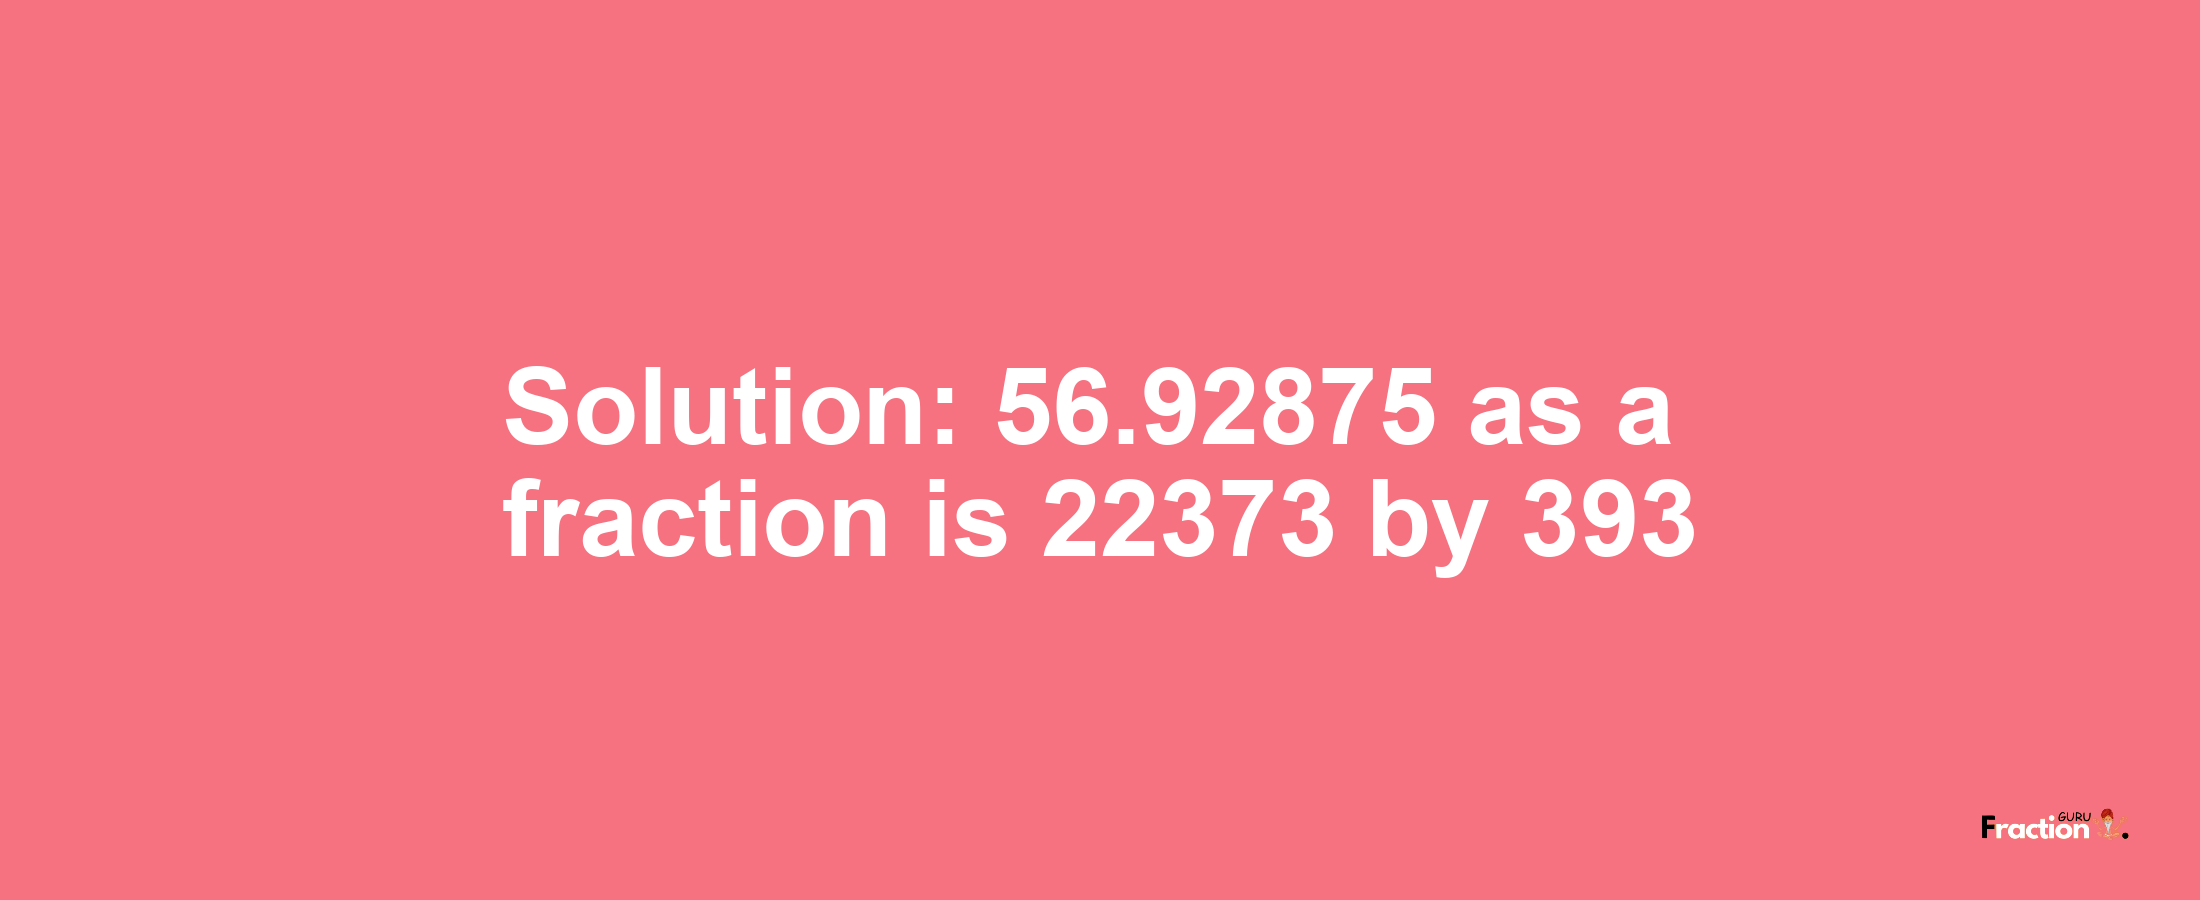 Solution:56.92875 as a fraction is 22373/393